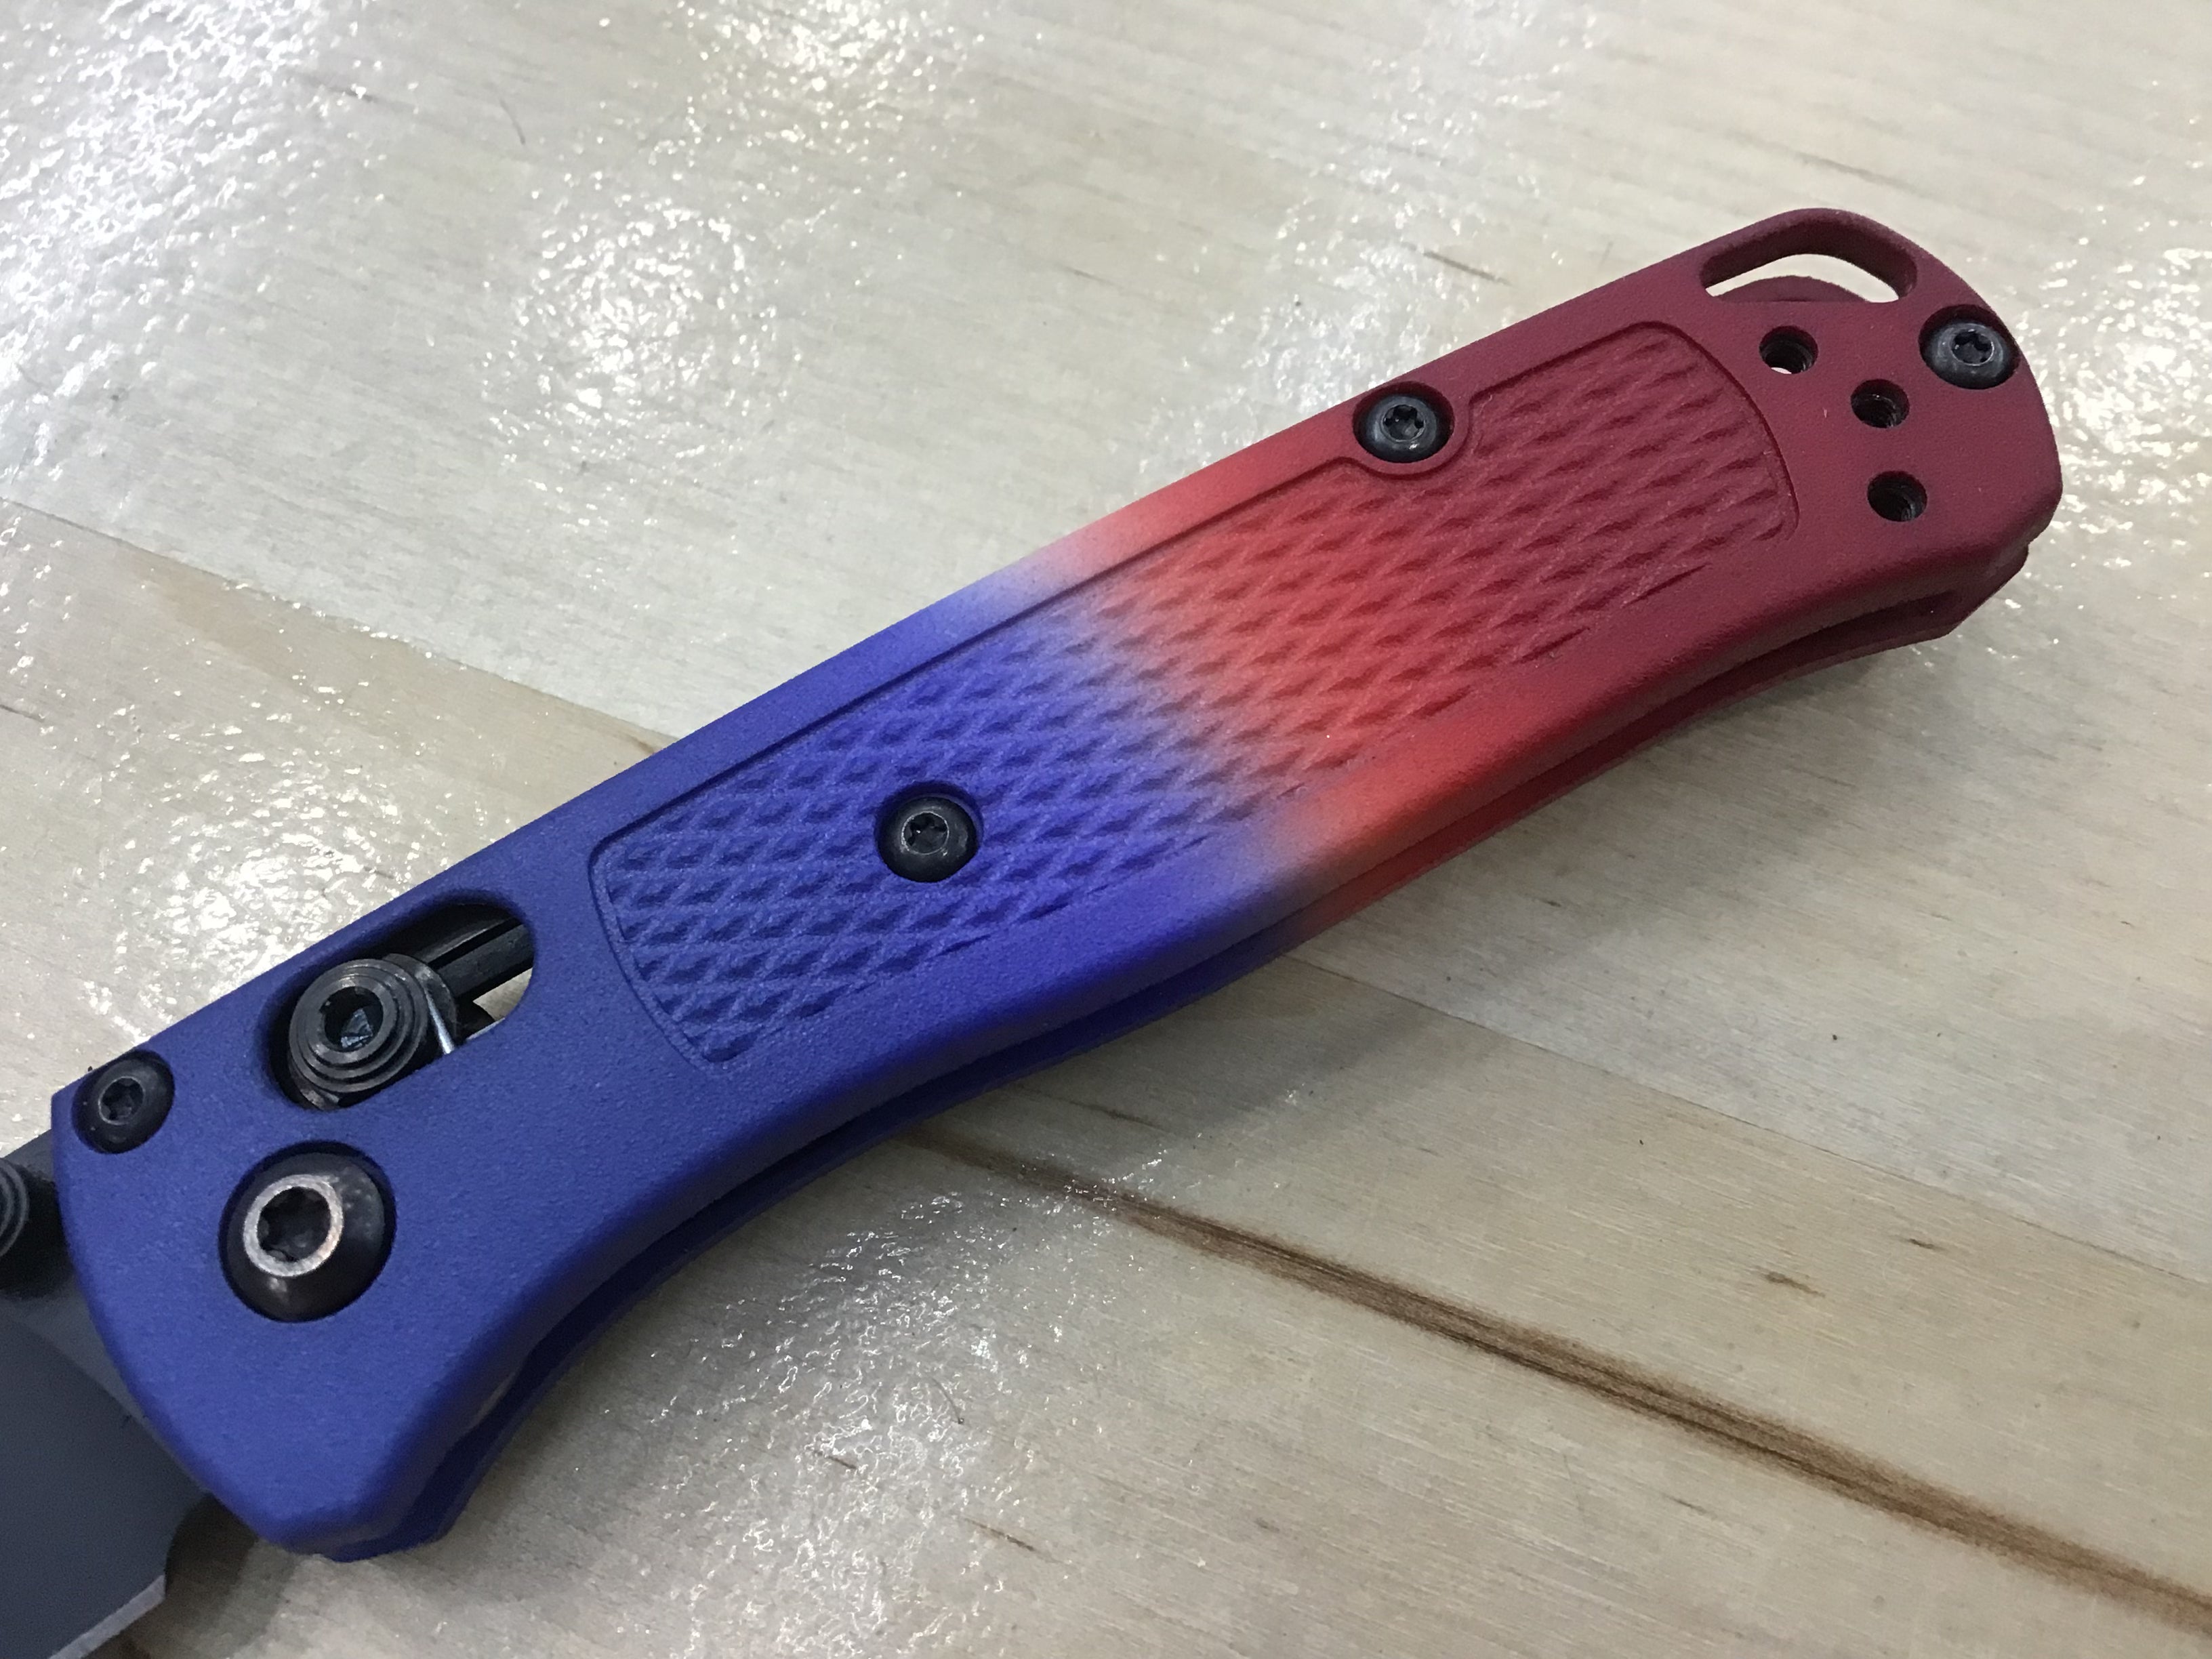 Benchmade Bomb Pop Mini Bugout Custom Red & Blue Dyed Scales CPM-S30V Black Blade  533BK-1CuBP